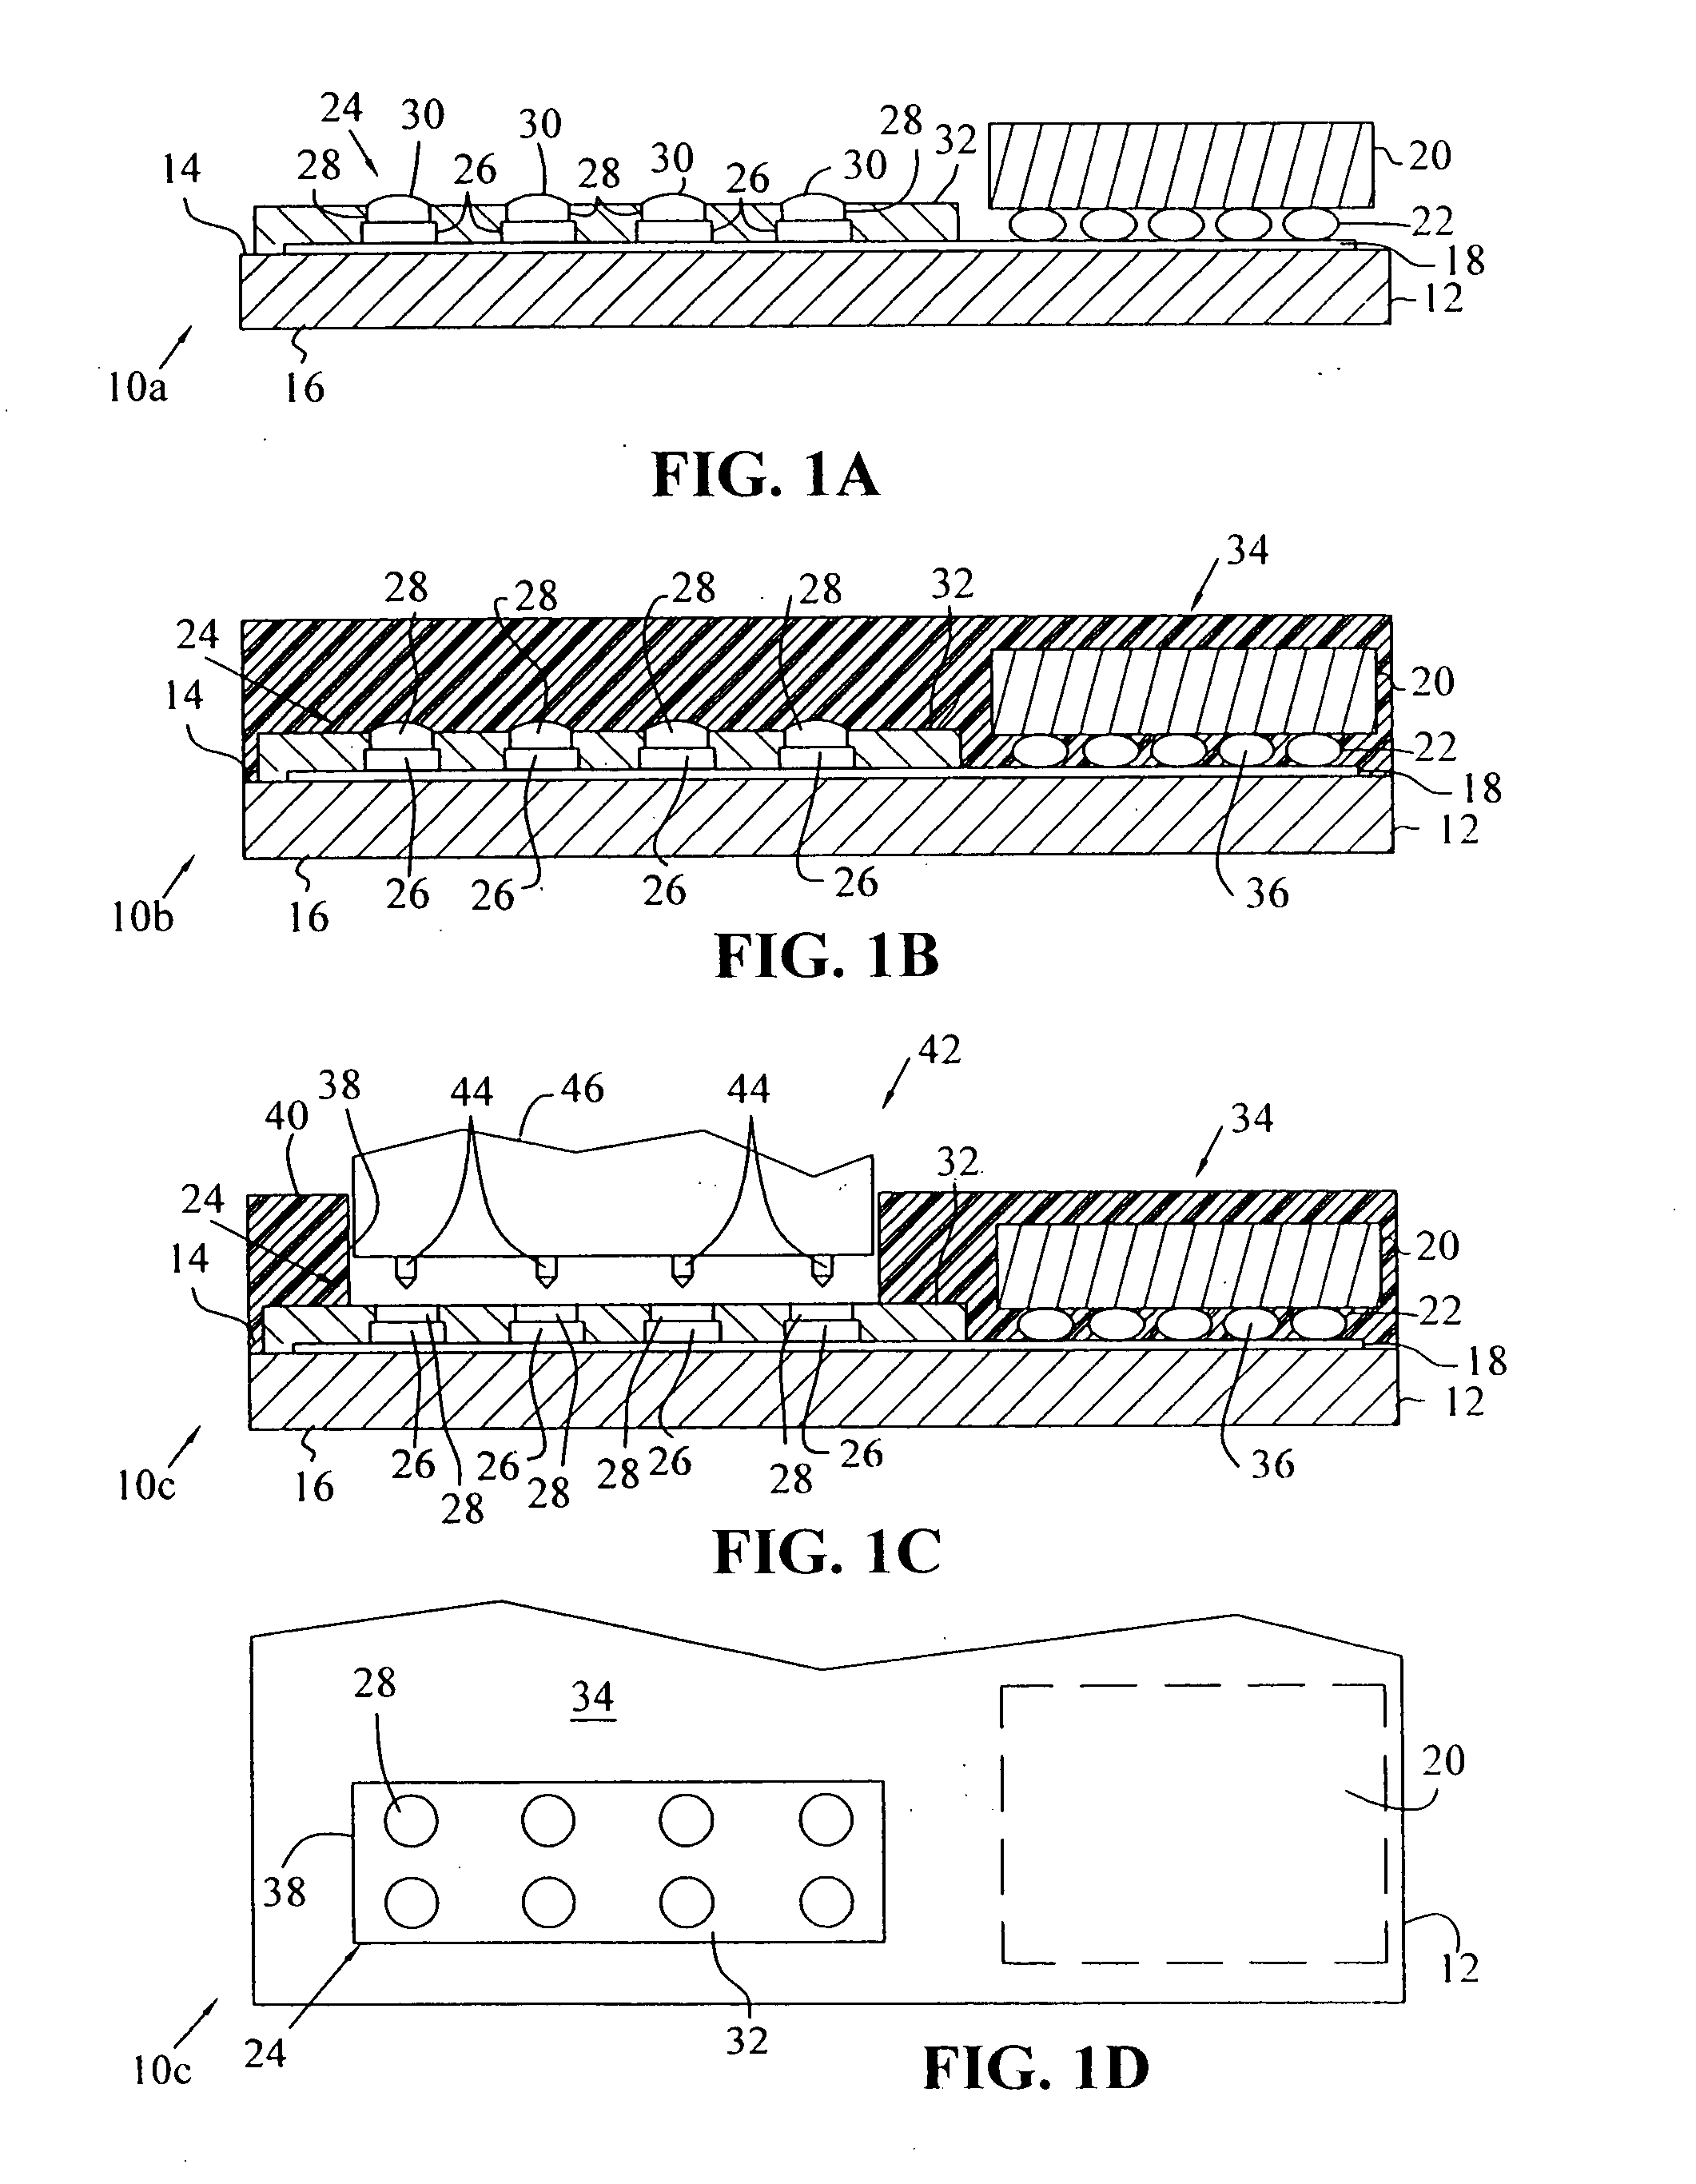 Methods to provide and expose a diagnostic connector on overmolded electronic packages